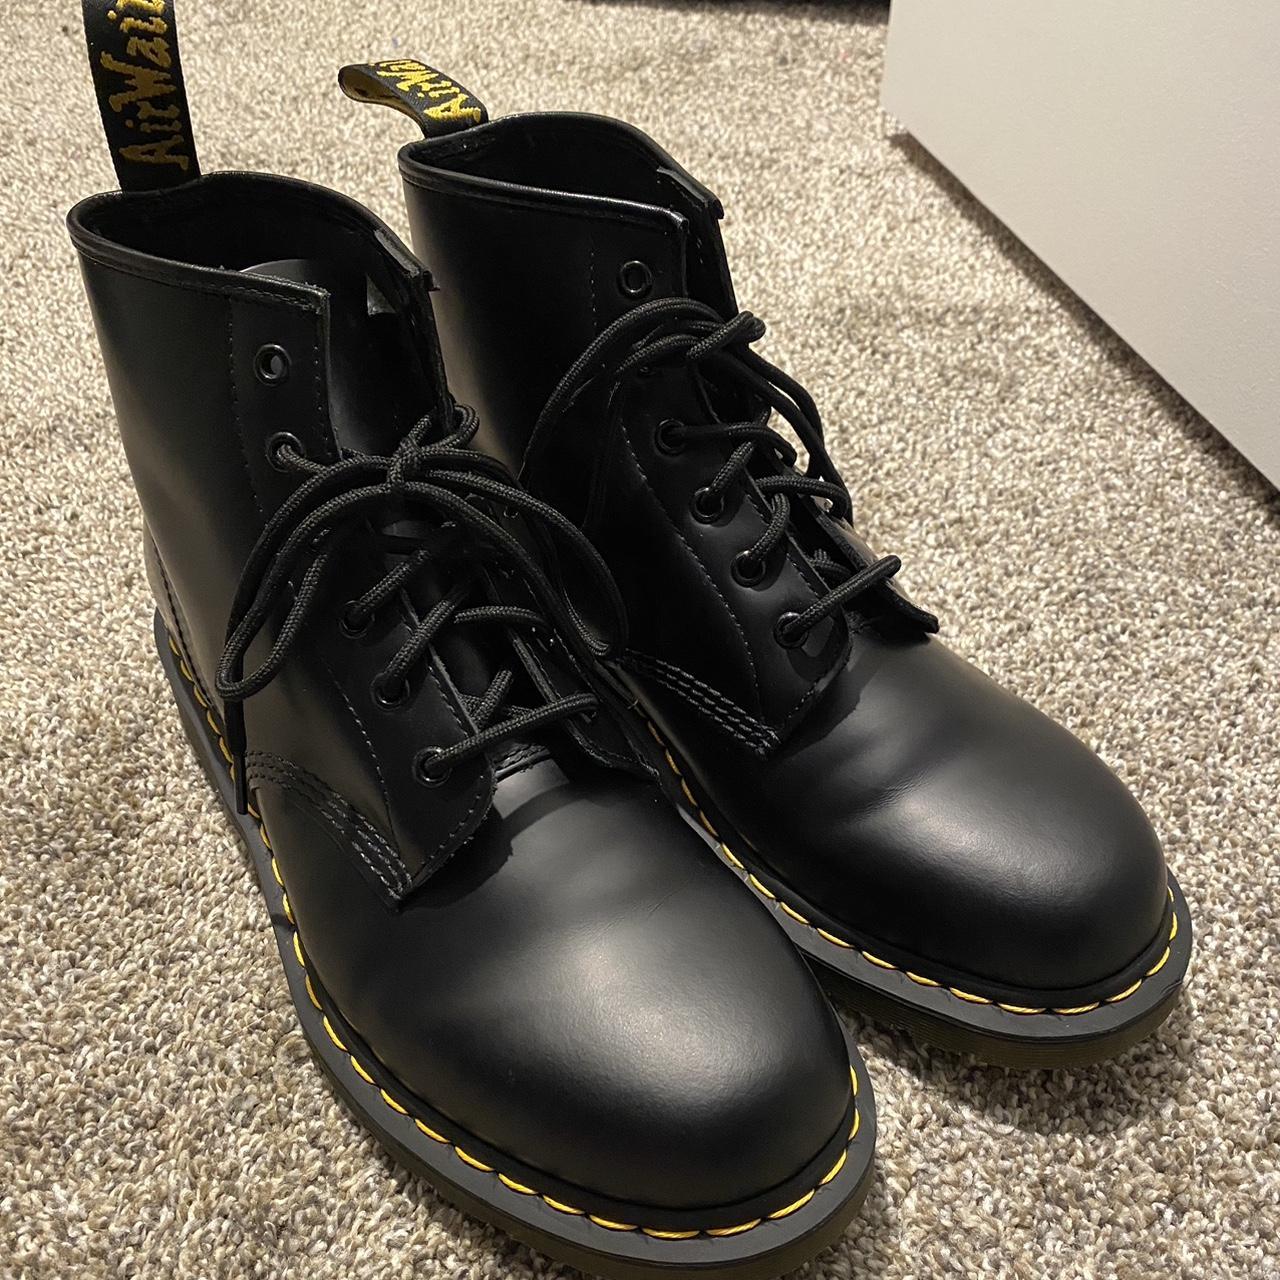 Dr. Martens Men's Black and Yellow Boots